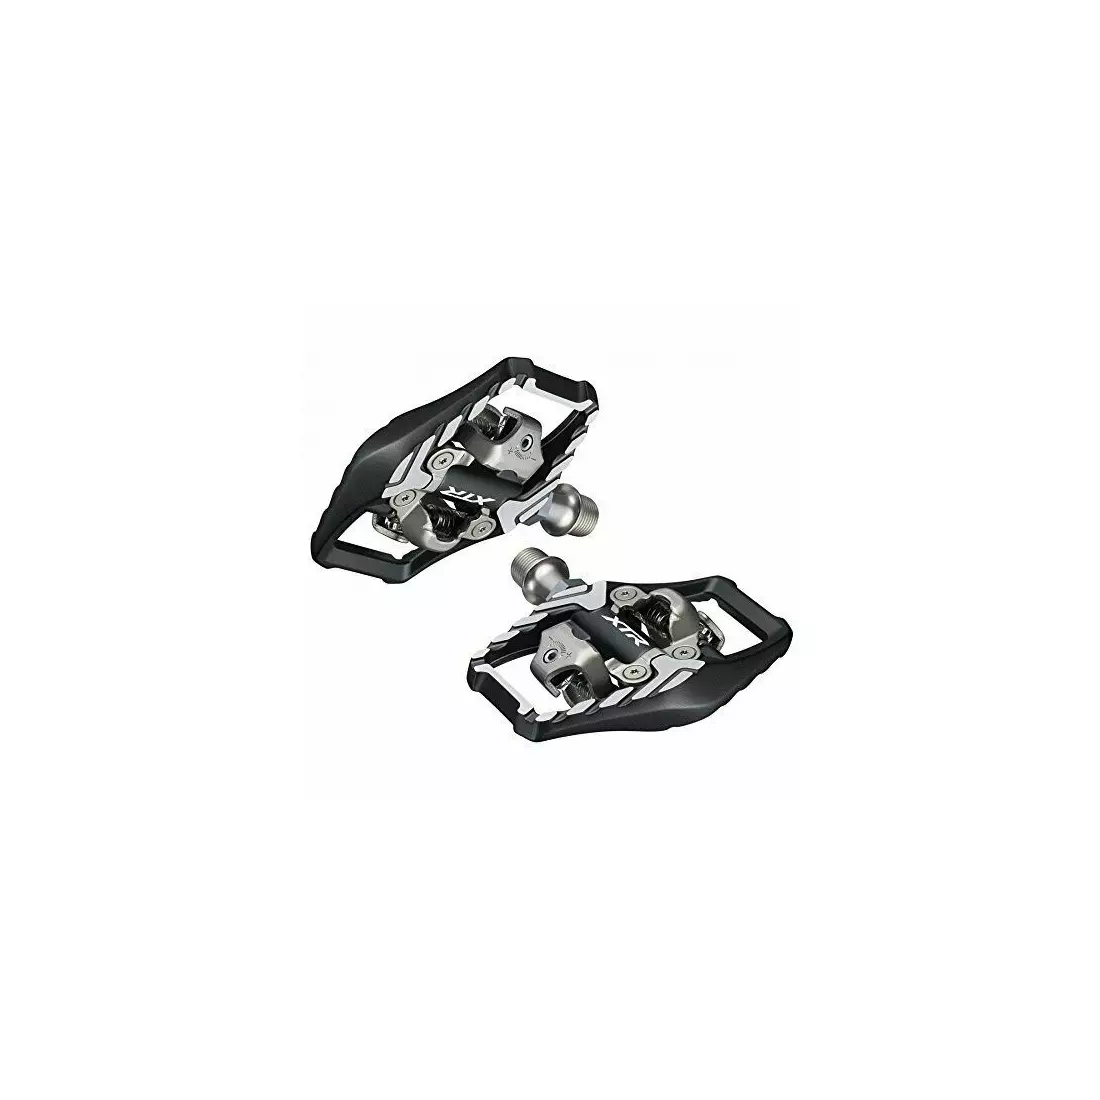 SHIMANO MTB / trekking bicycle pedals with cleats SPD M9120 IPDM9120 